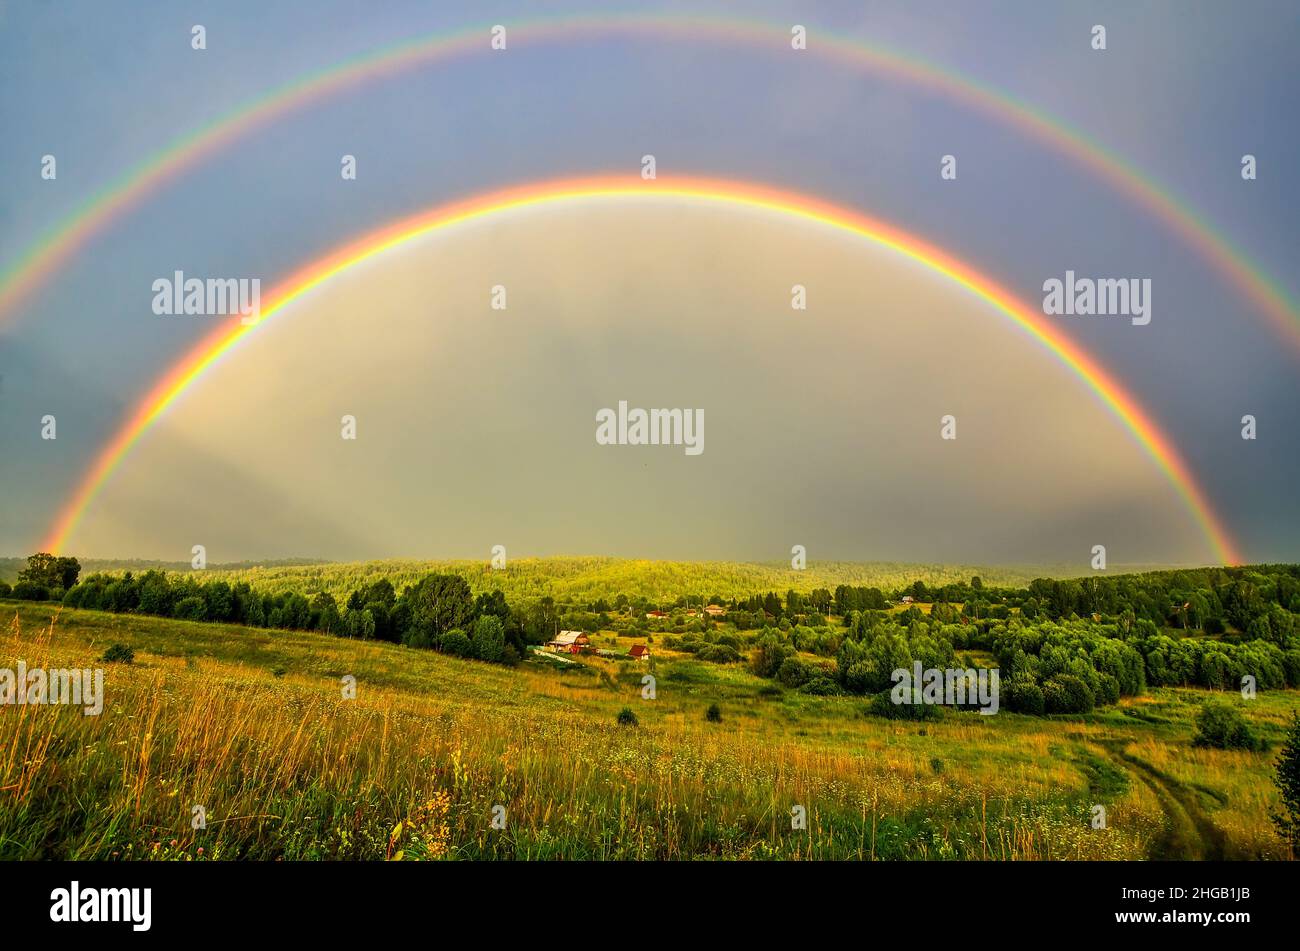 Full arc of double rainbow over summer evening rural landscape - panoramic view of hills with deep forests covered, golden colored meadow with sun bea Stock Photo